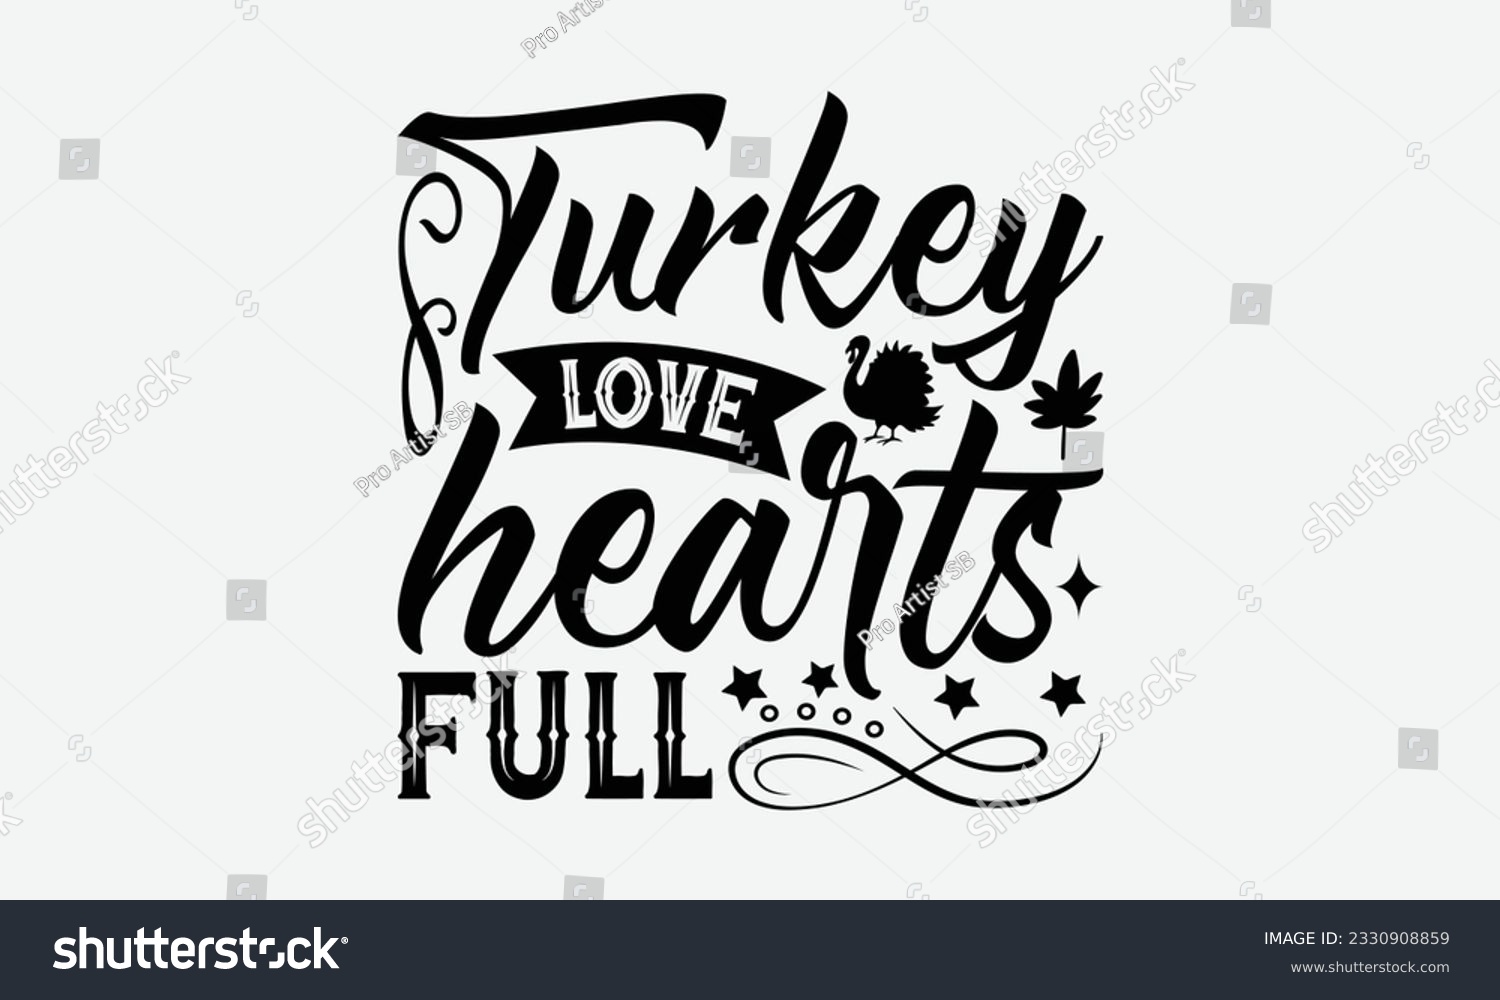 SVG of Turkey Love Hearts Full - Thanksgiving T-shirt Design Template, Happy Turkey Day SVG Quotes, Hand Drawn Lettering Phrase Isolated On White Background. svg